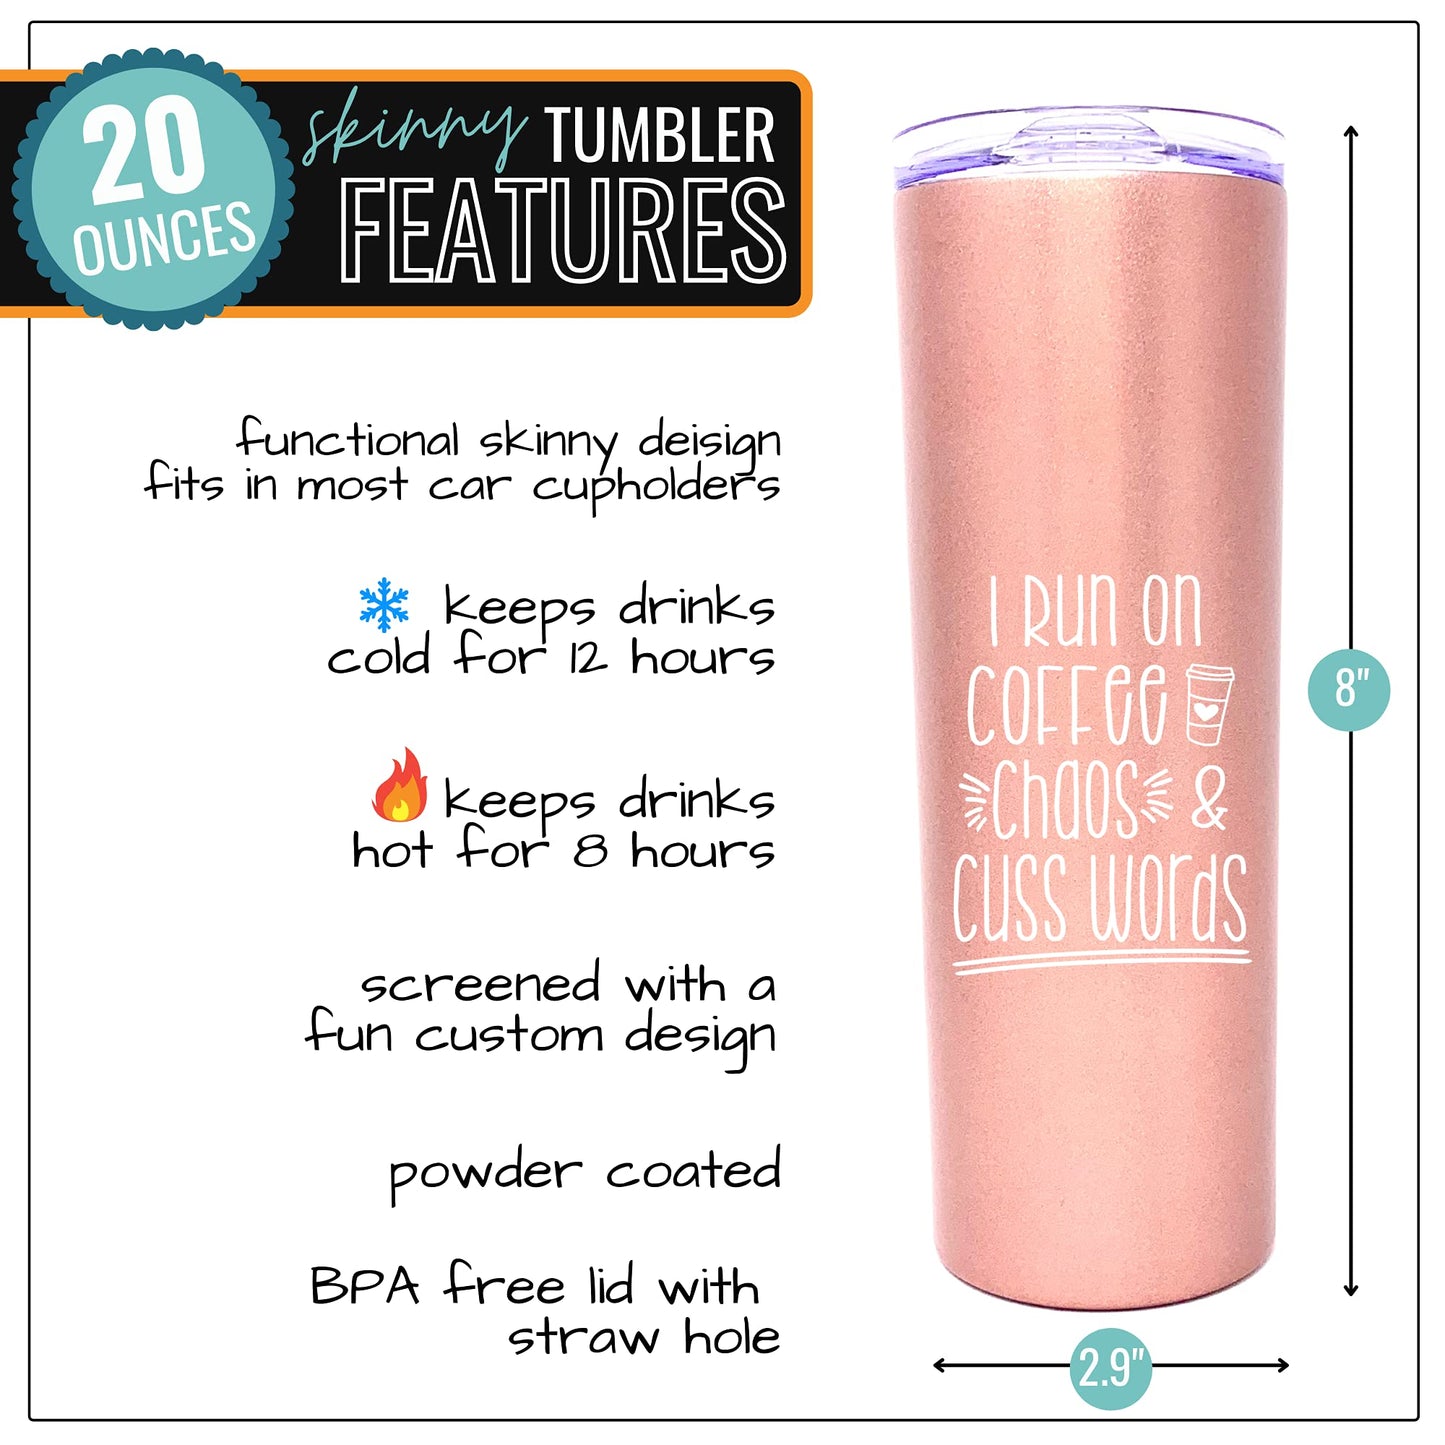 I Run on Coffee, Chaos and Cuss Word 20 oz Rose Gold Skinny Tumbler for Bosses